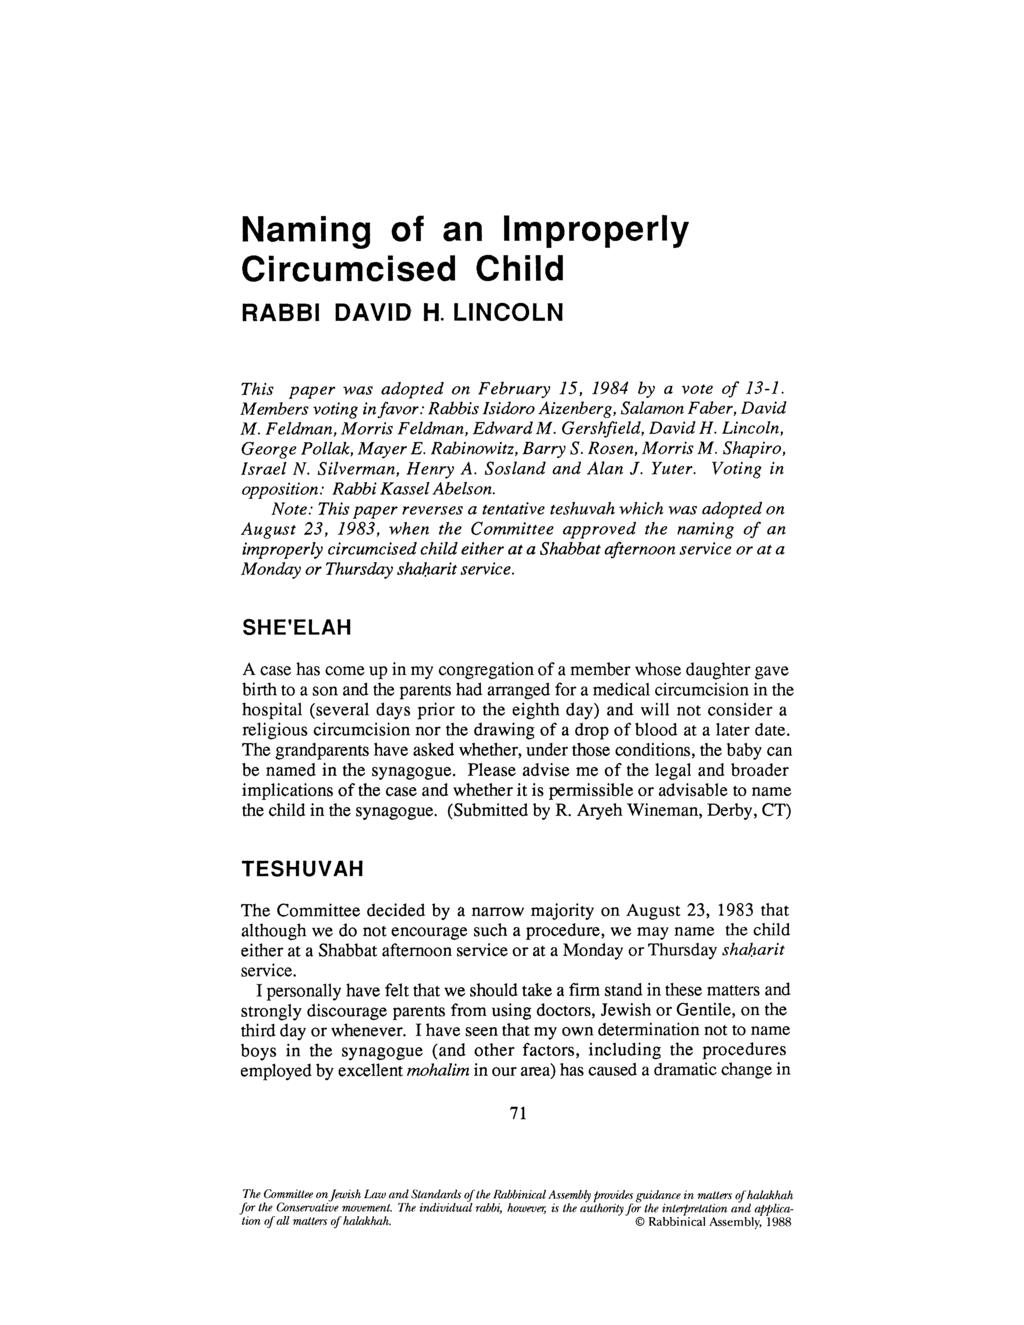 Naming of an Improperly Circumcised Child RABBI DAVID H. LINCOLN This paper was adopted on February 15, 1984 by a vote of 13-1.